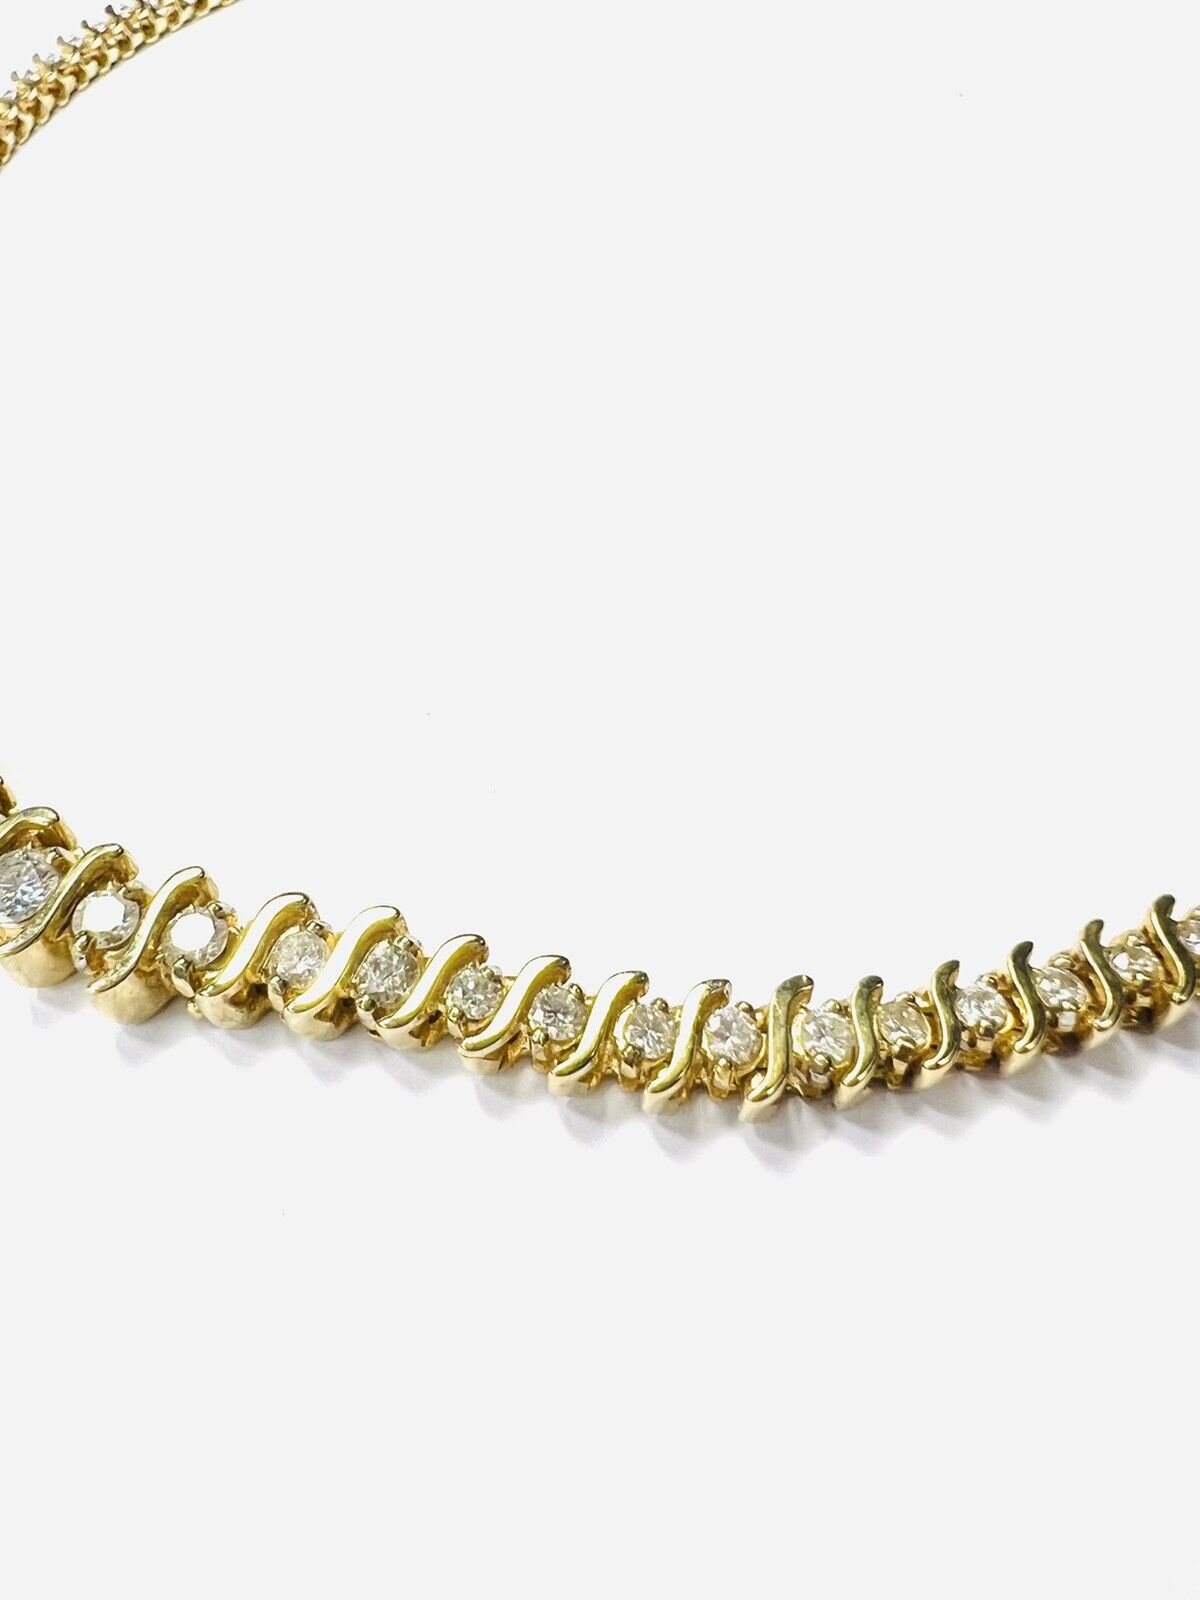 Solid 14K Yellow Gold 4.35ctw Diamond S link Rivera Tennis Necklace 16"